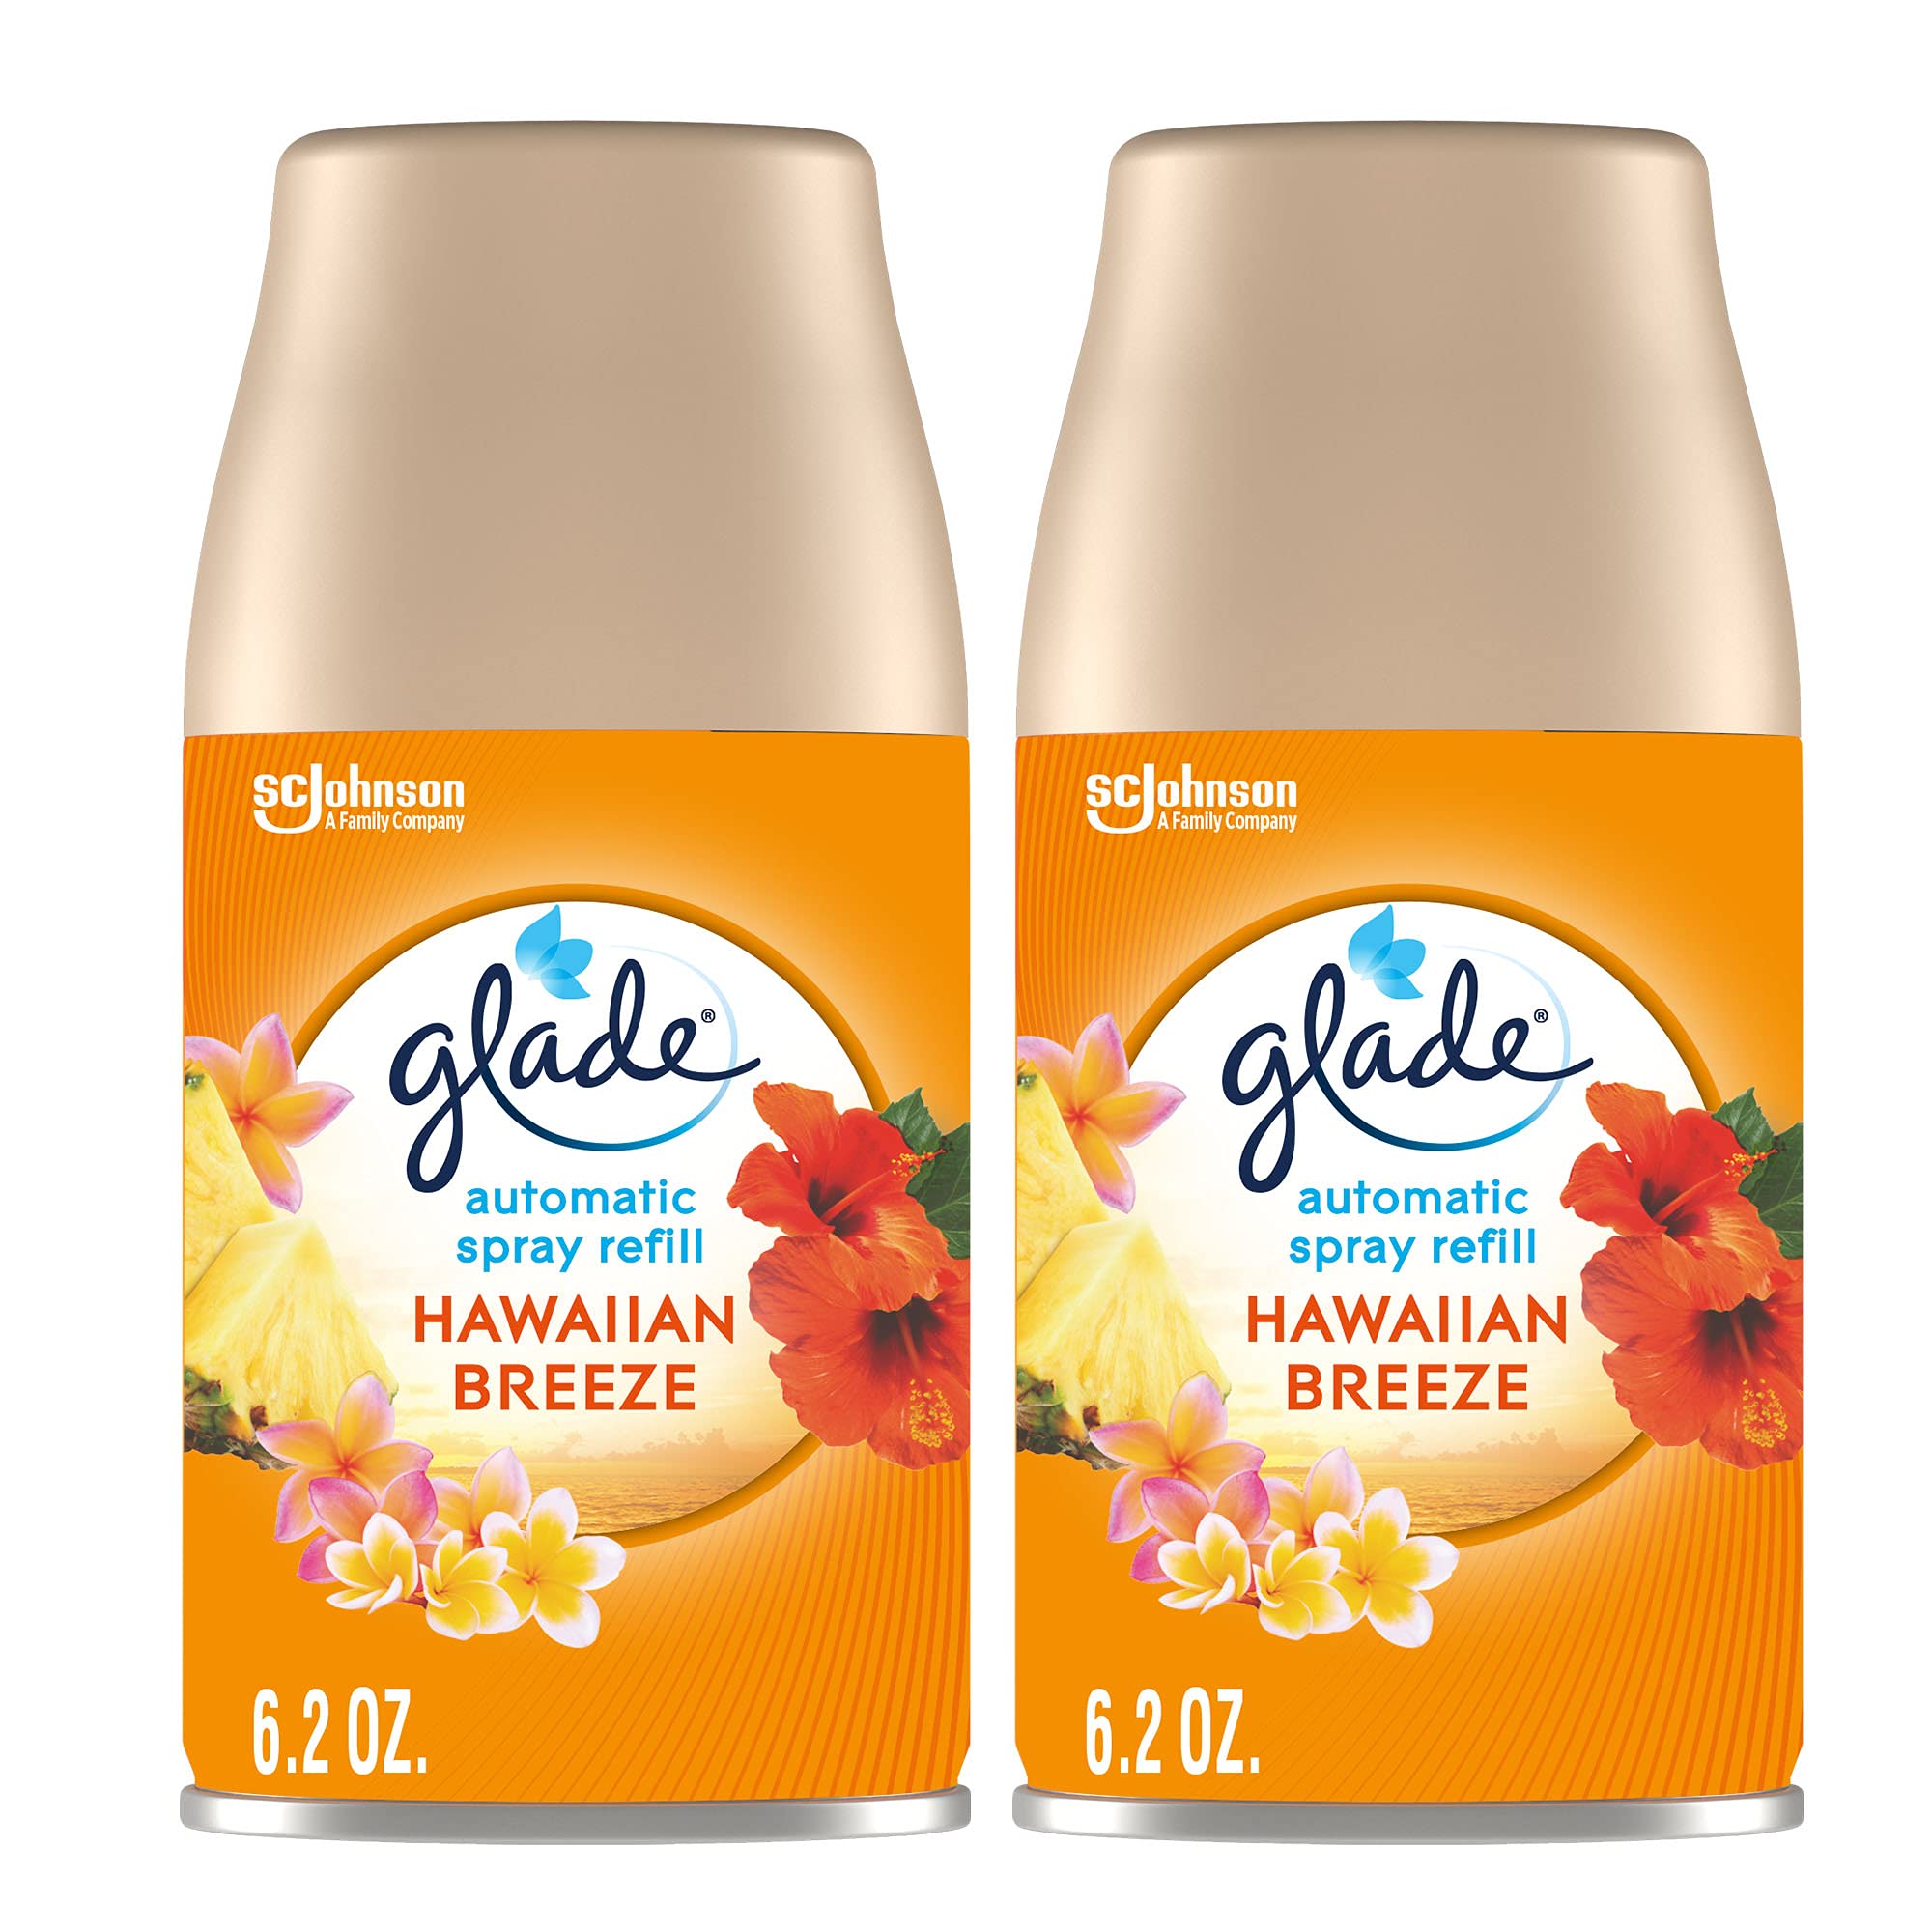 Glade Automatic Spray Refill, Air Freshener for Home and Bathroom, Hawaiian Breeze, 6.2 Oz, 2 Count